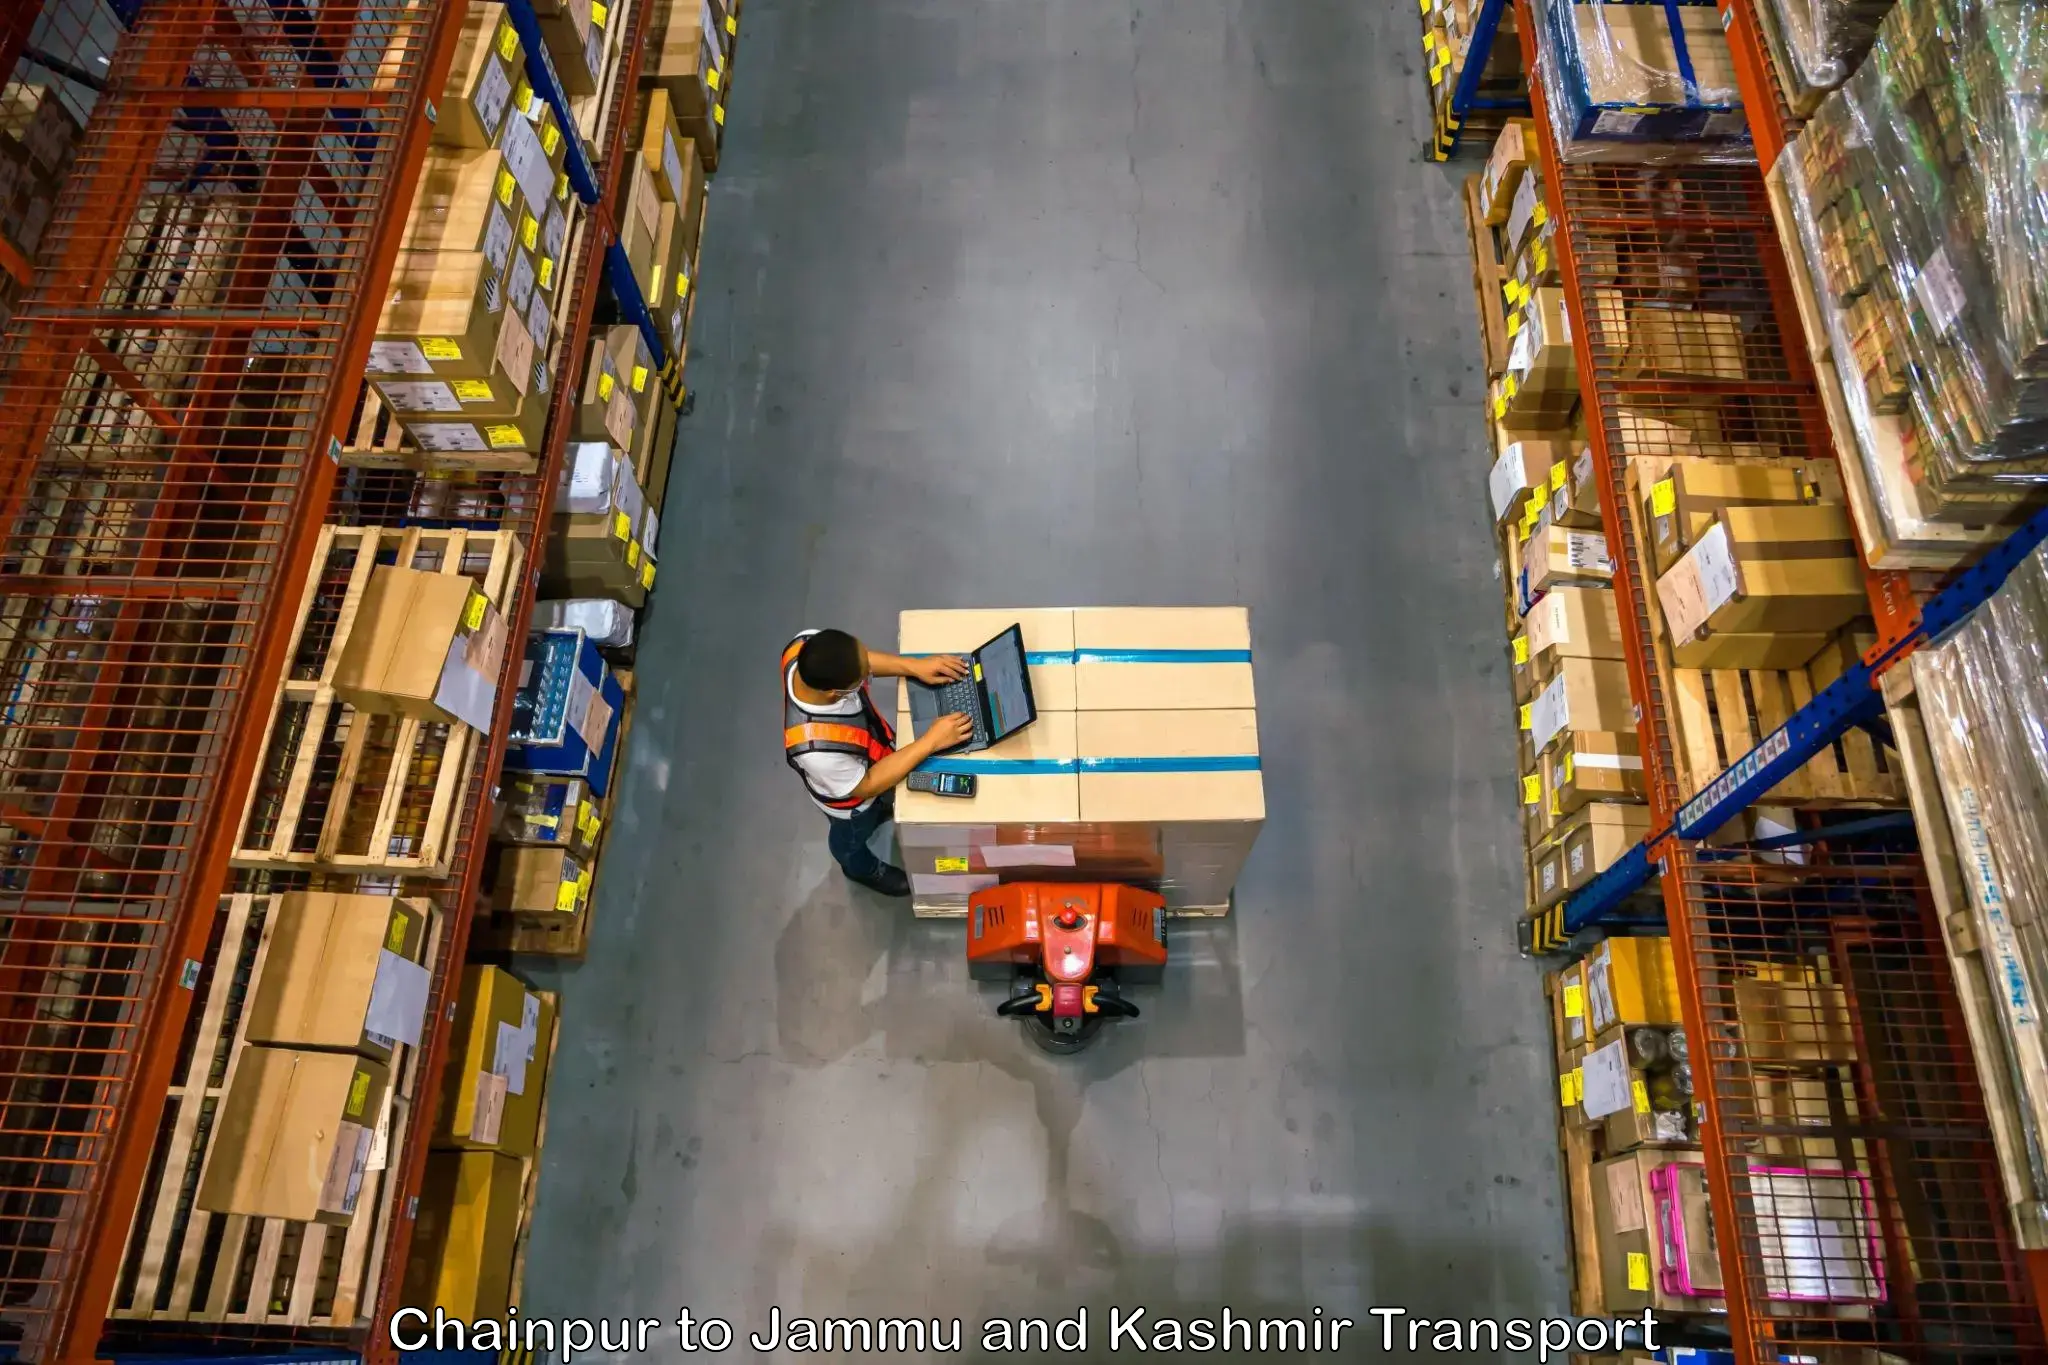 Goods delivery service Chainpur to Jammu and Kashmir